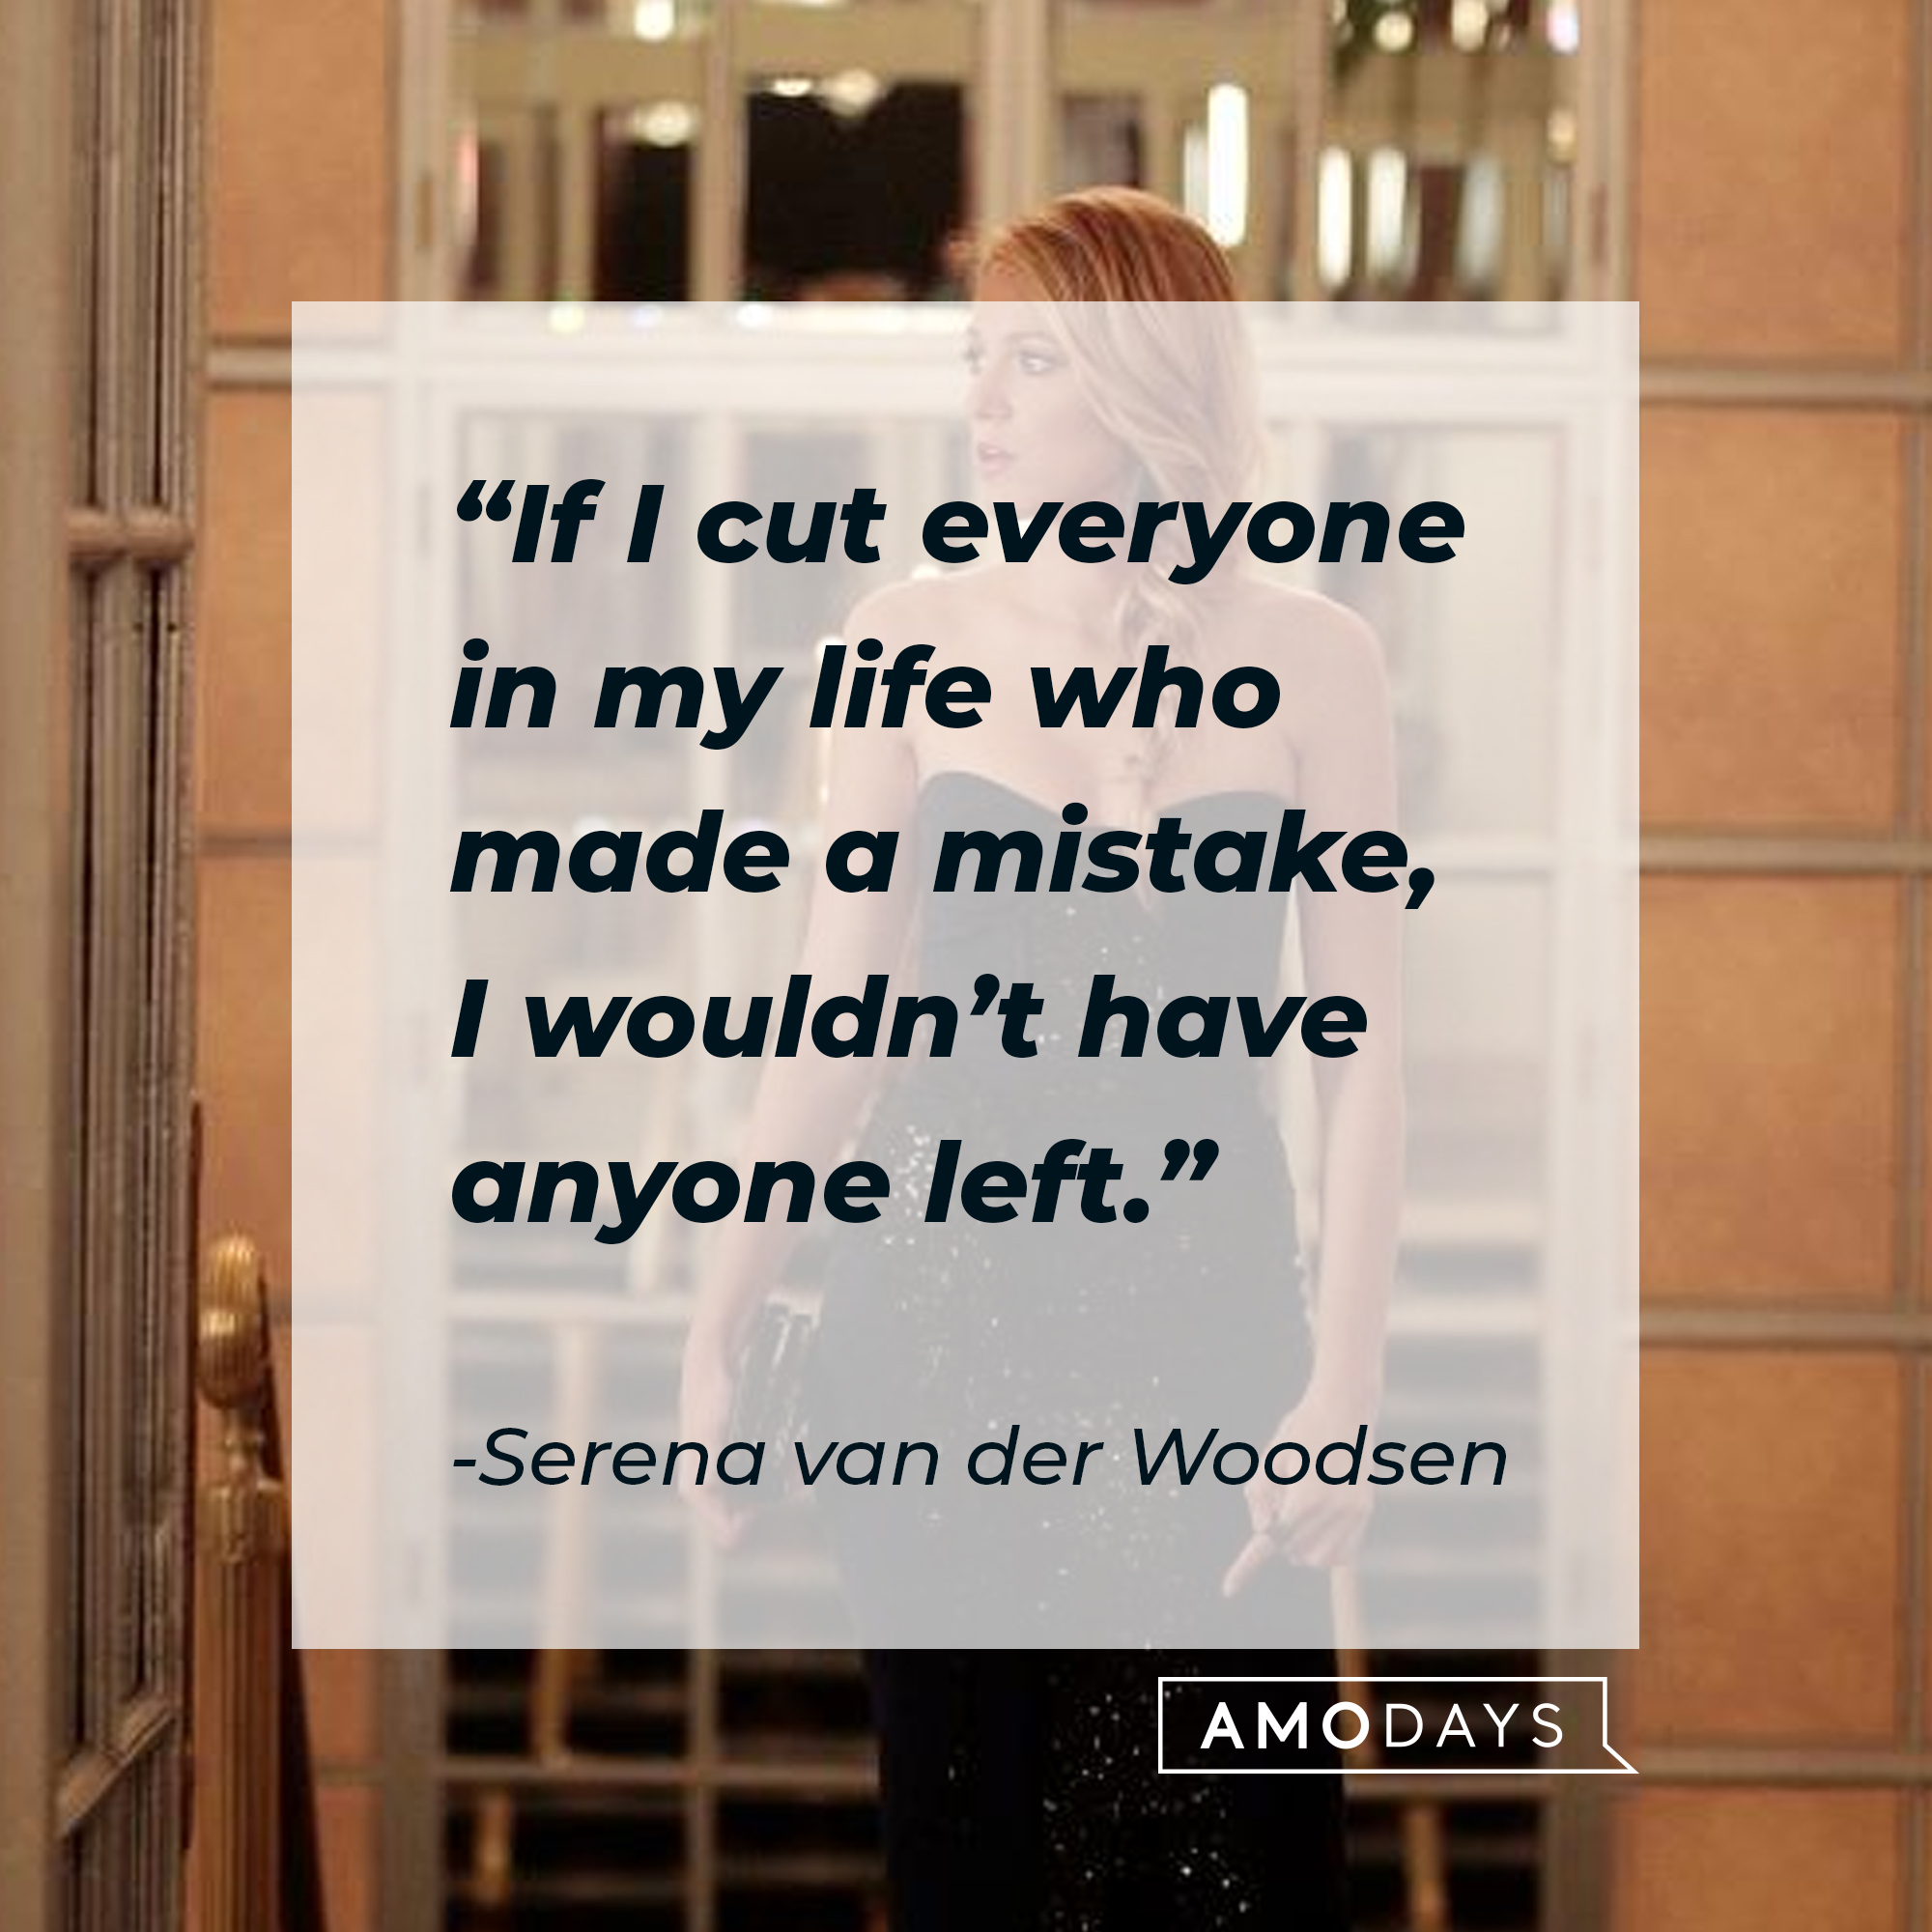 Serena van der Woodsen, with her quote: “If I cut everyone in my life who made a mistake, I wouldn’t have anyone left.” | Source: Facebook.com/GossipGirl